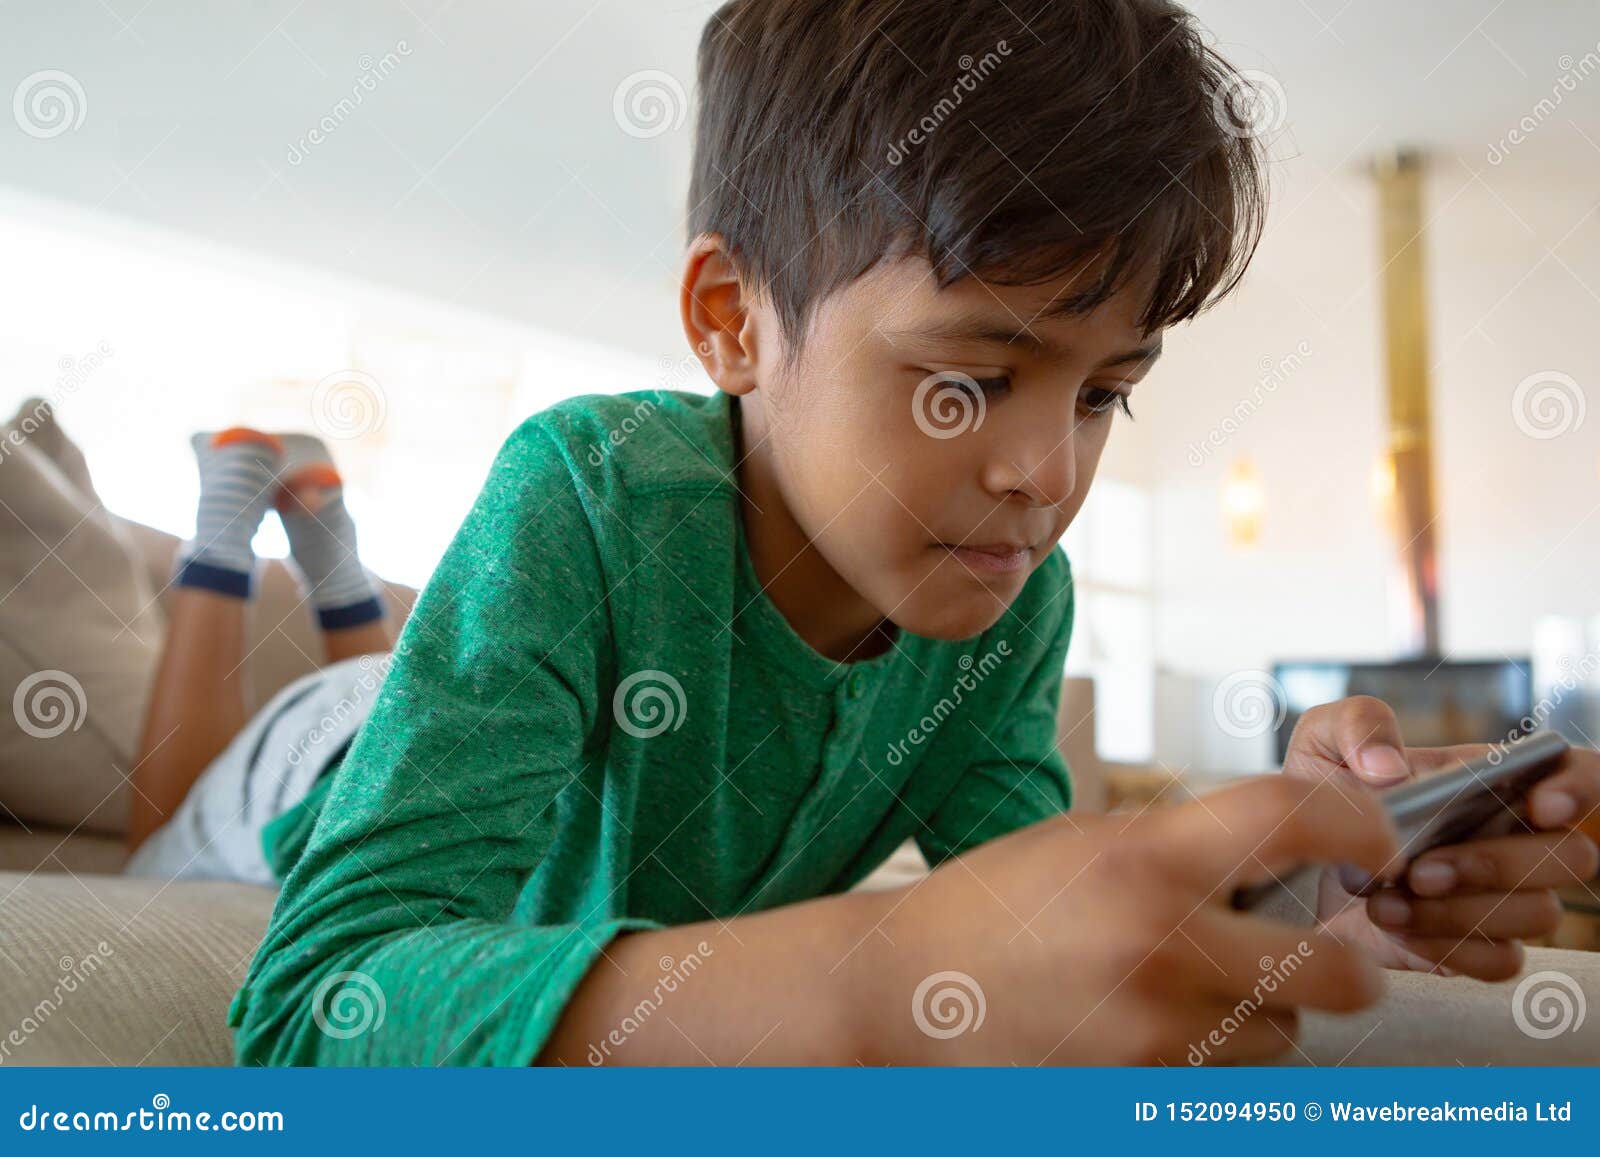 Boy Playing Game On Mobile Phone While Lying On Sofa At Home Stock